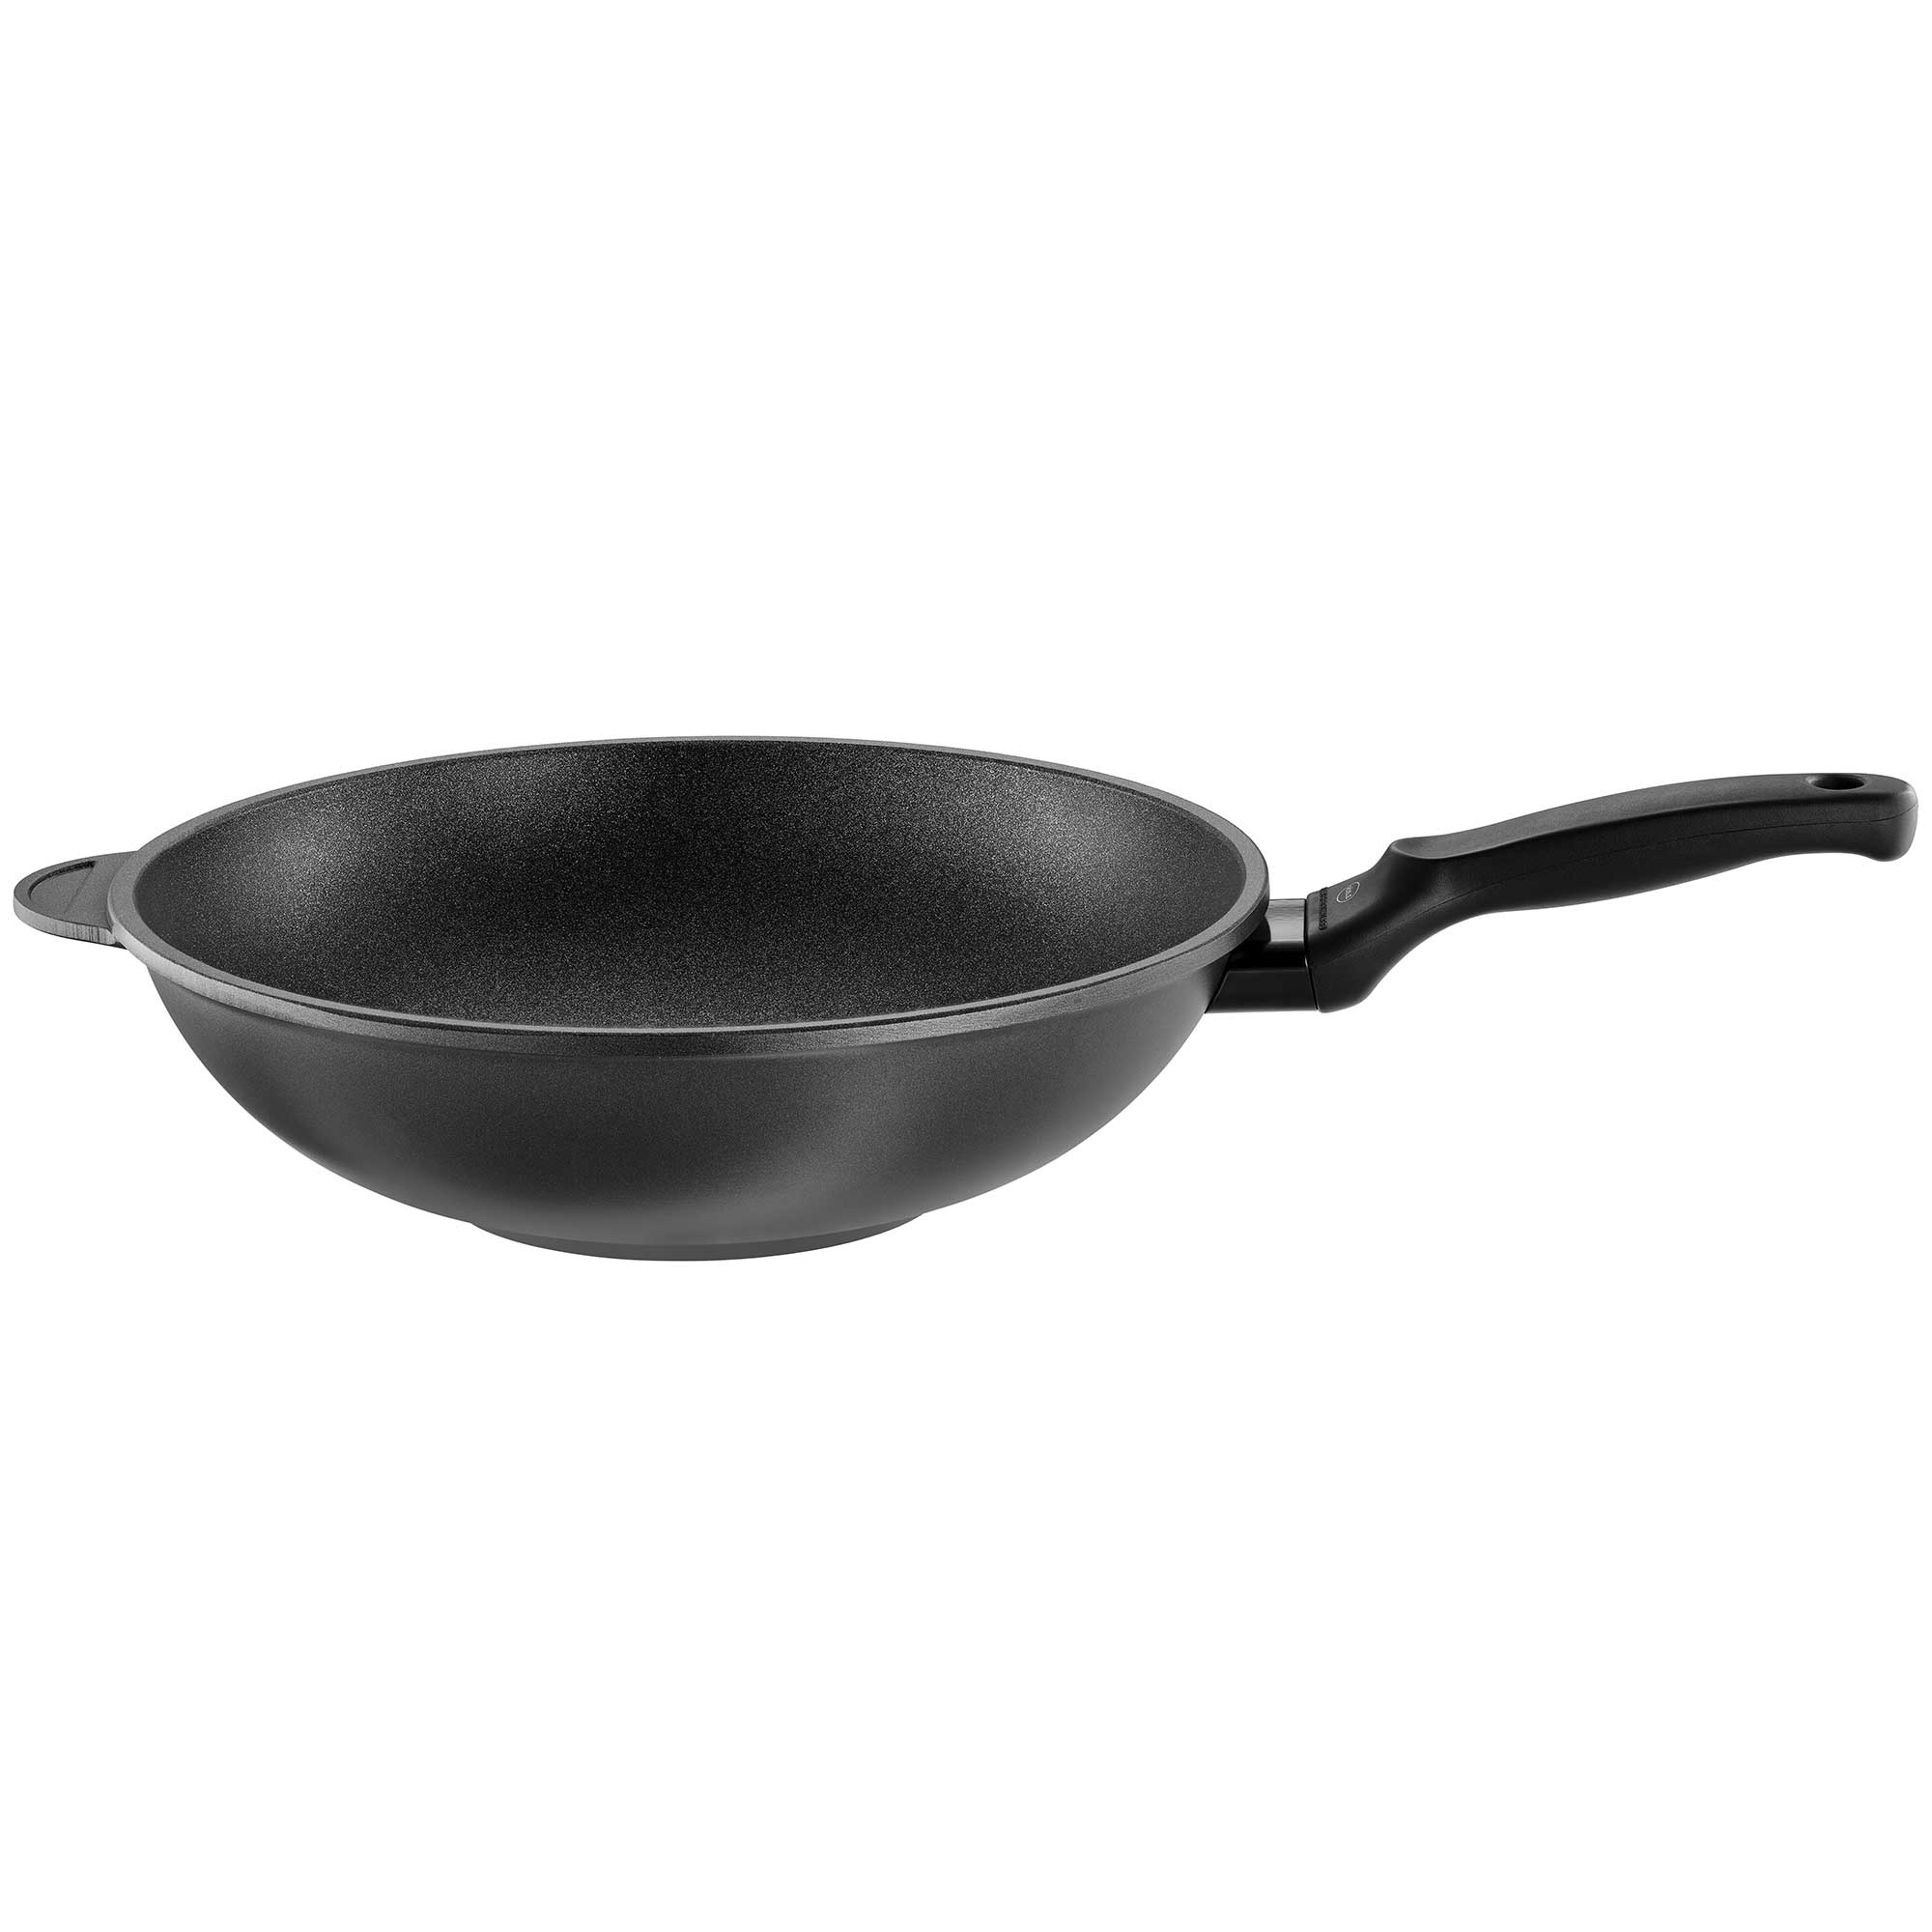 Wok Pan "Cadini" Ø 32 cm / 12.6 in. with non-stick coating ProResist